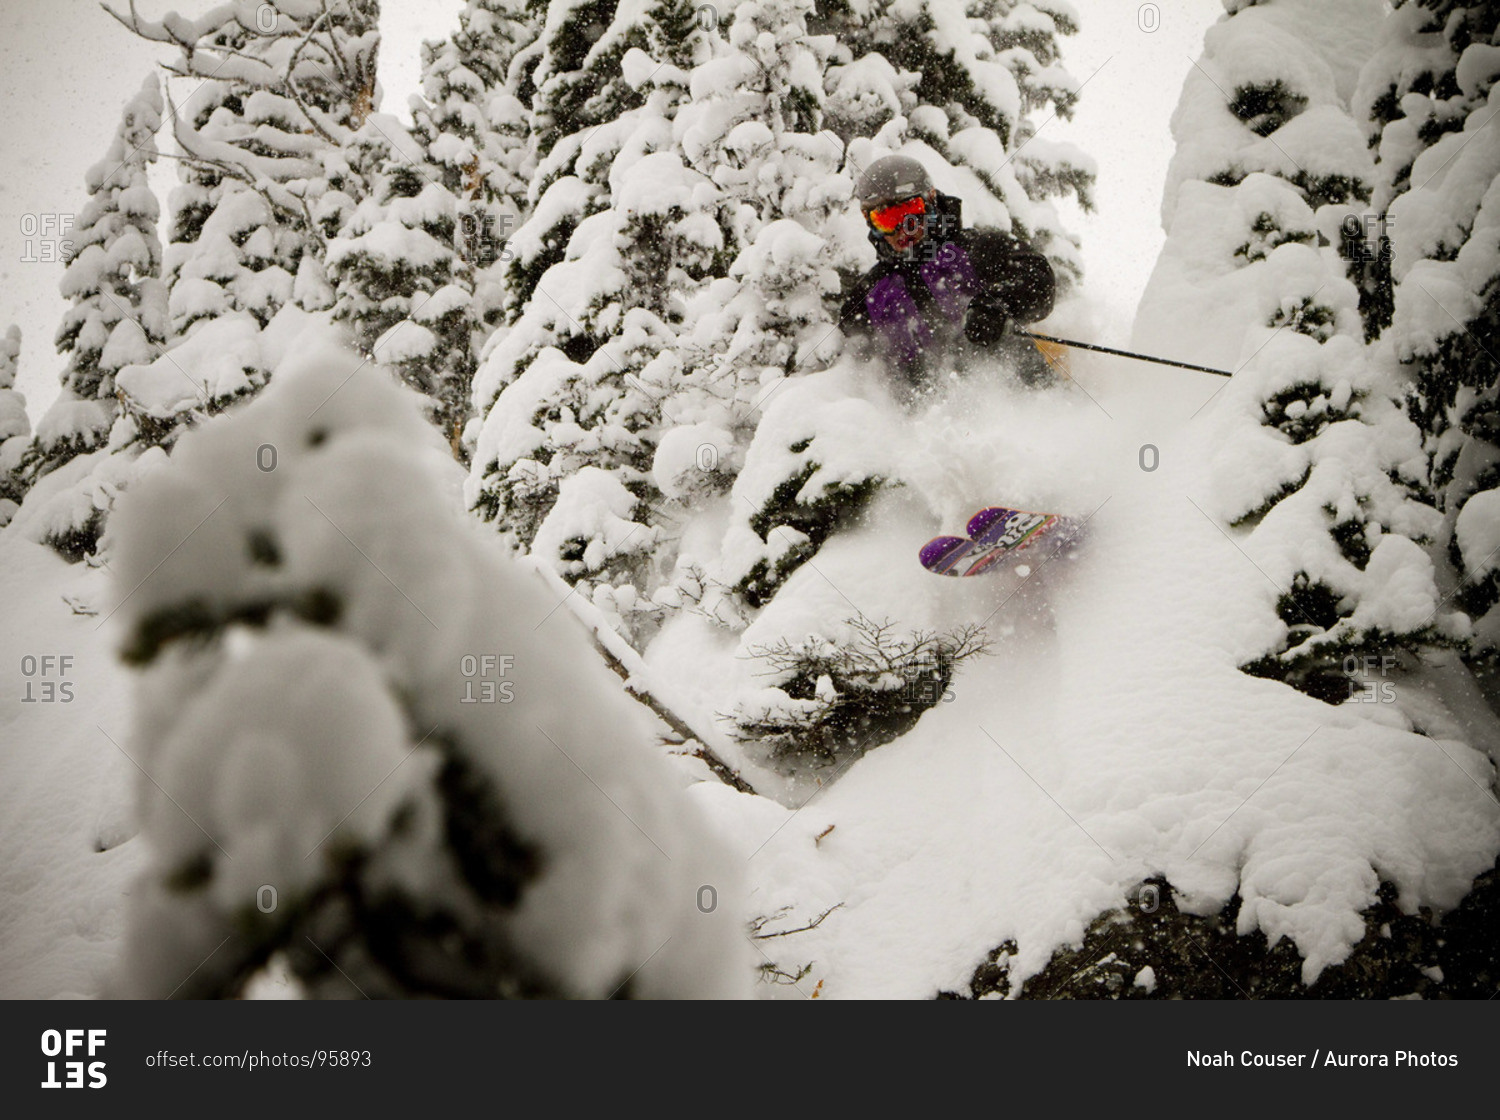 A skier punches through some powder and some trees on a cloudy day.